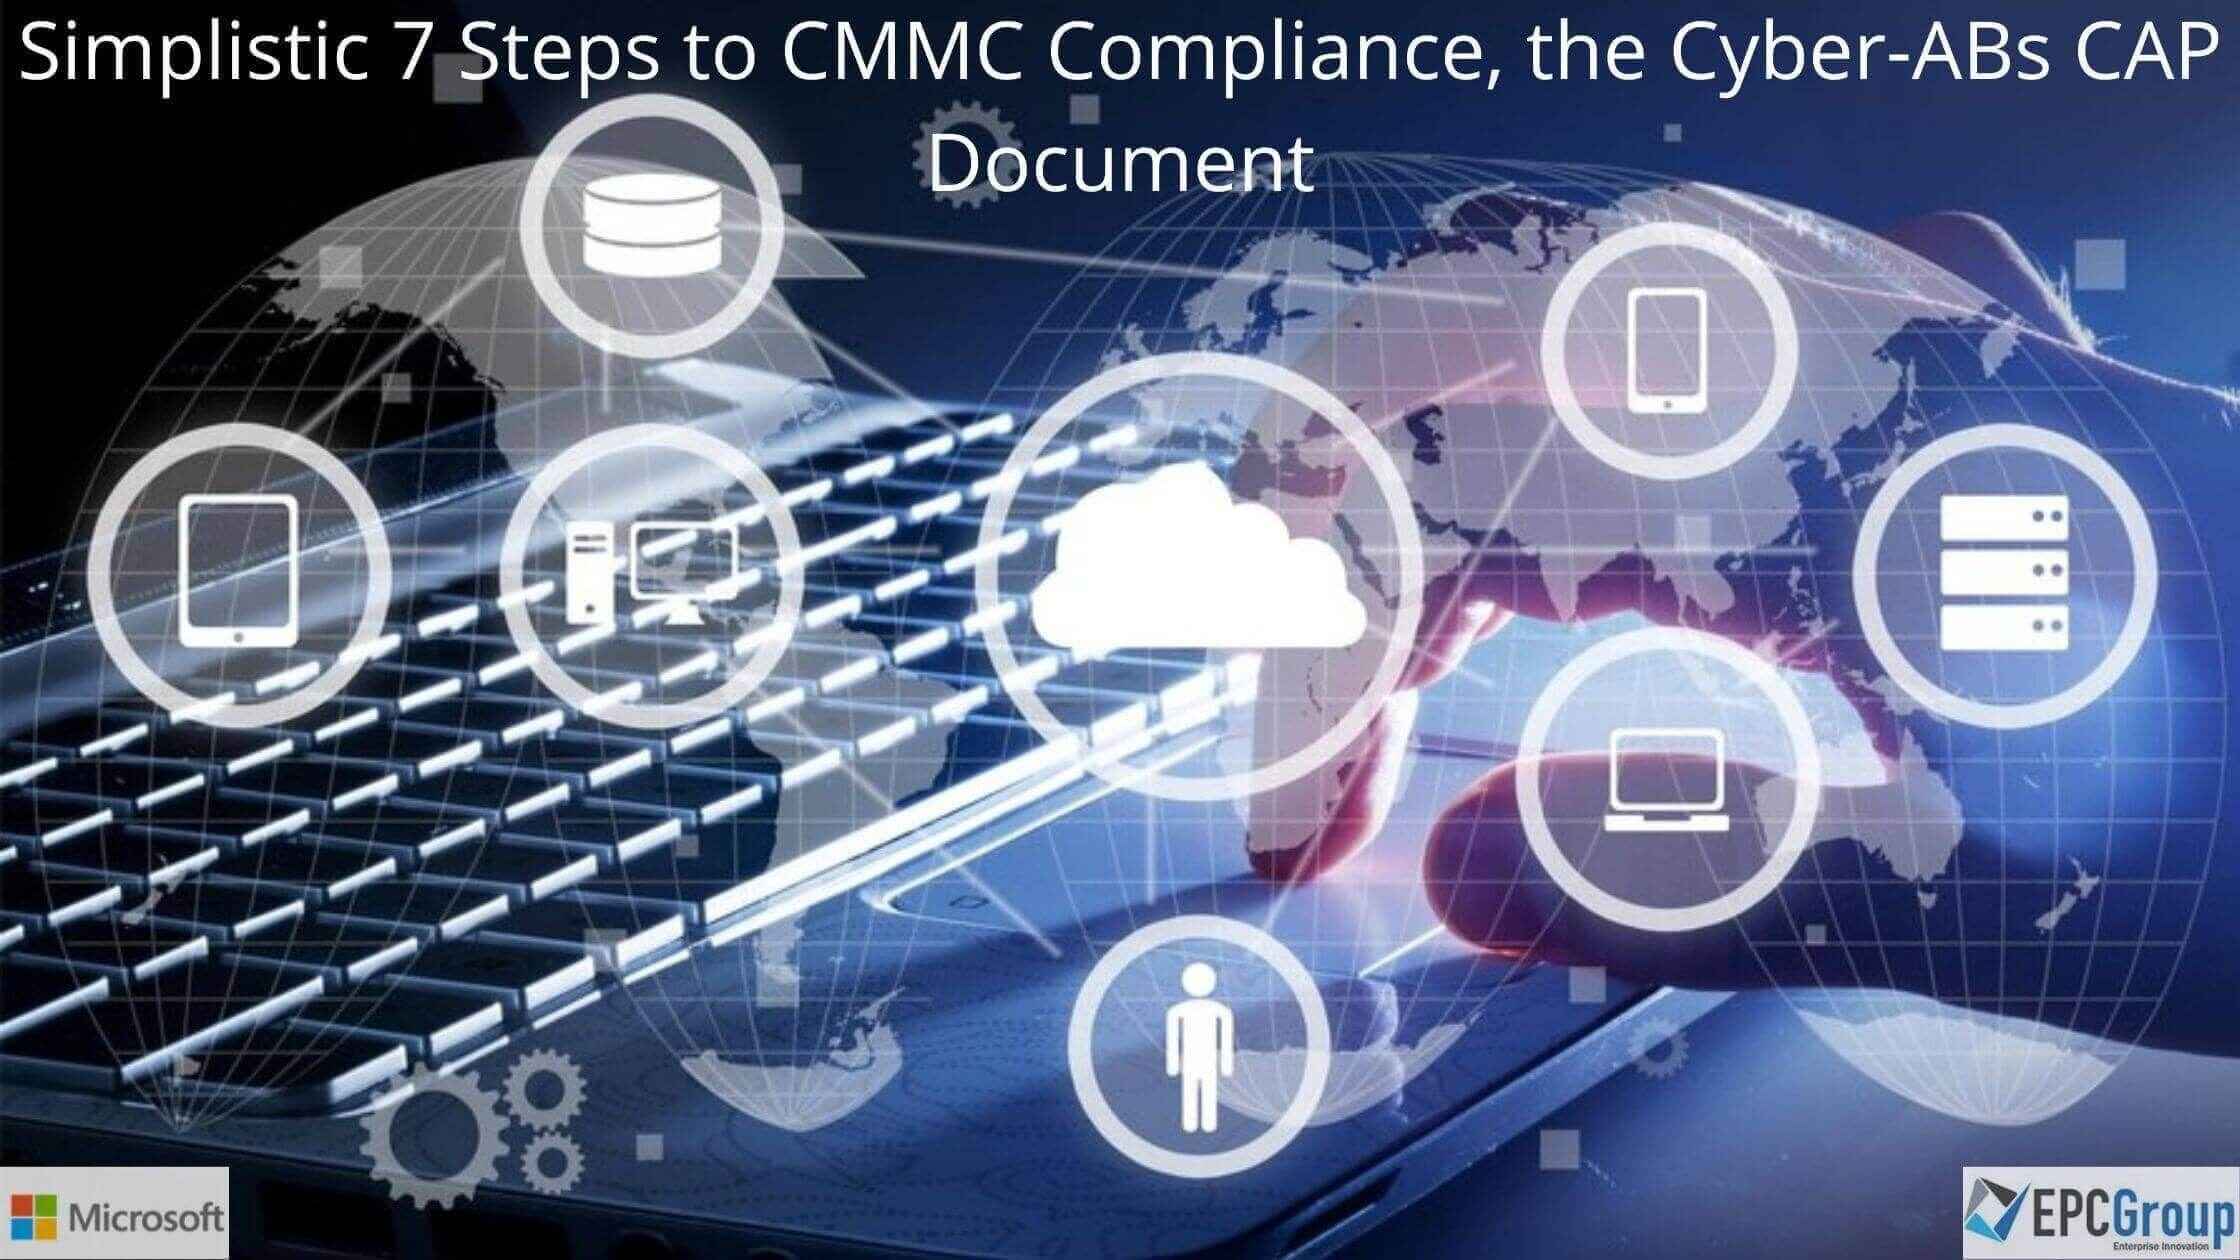 Simplistic 7 Steps to CMMC Compliance, the Cyber-ABs CAP Document